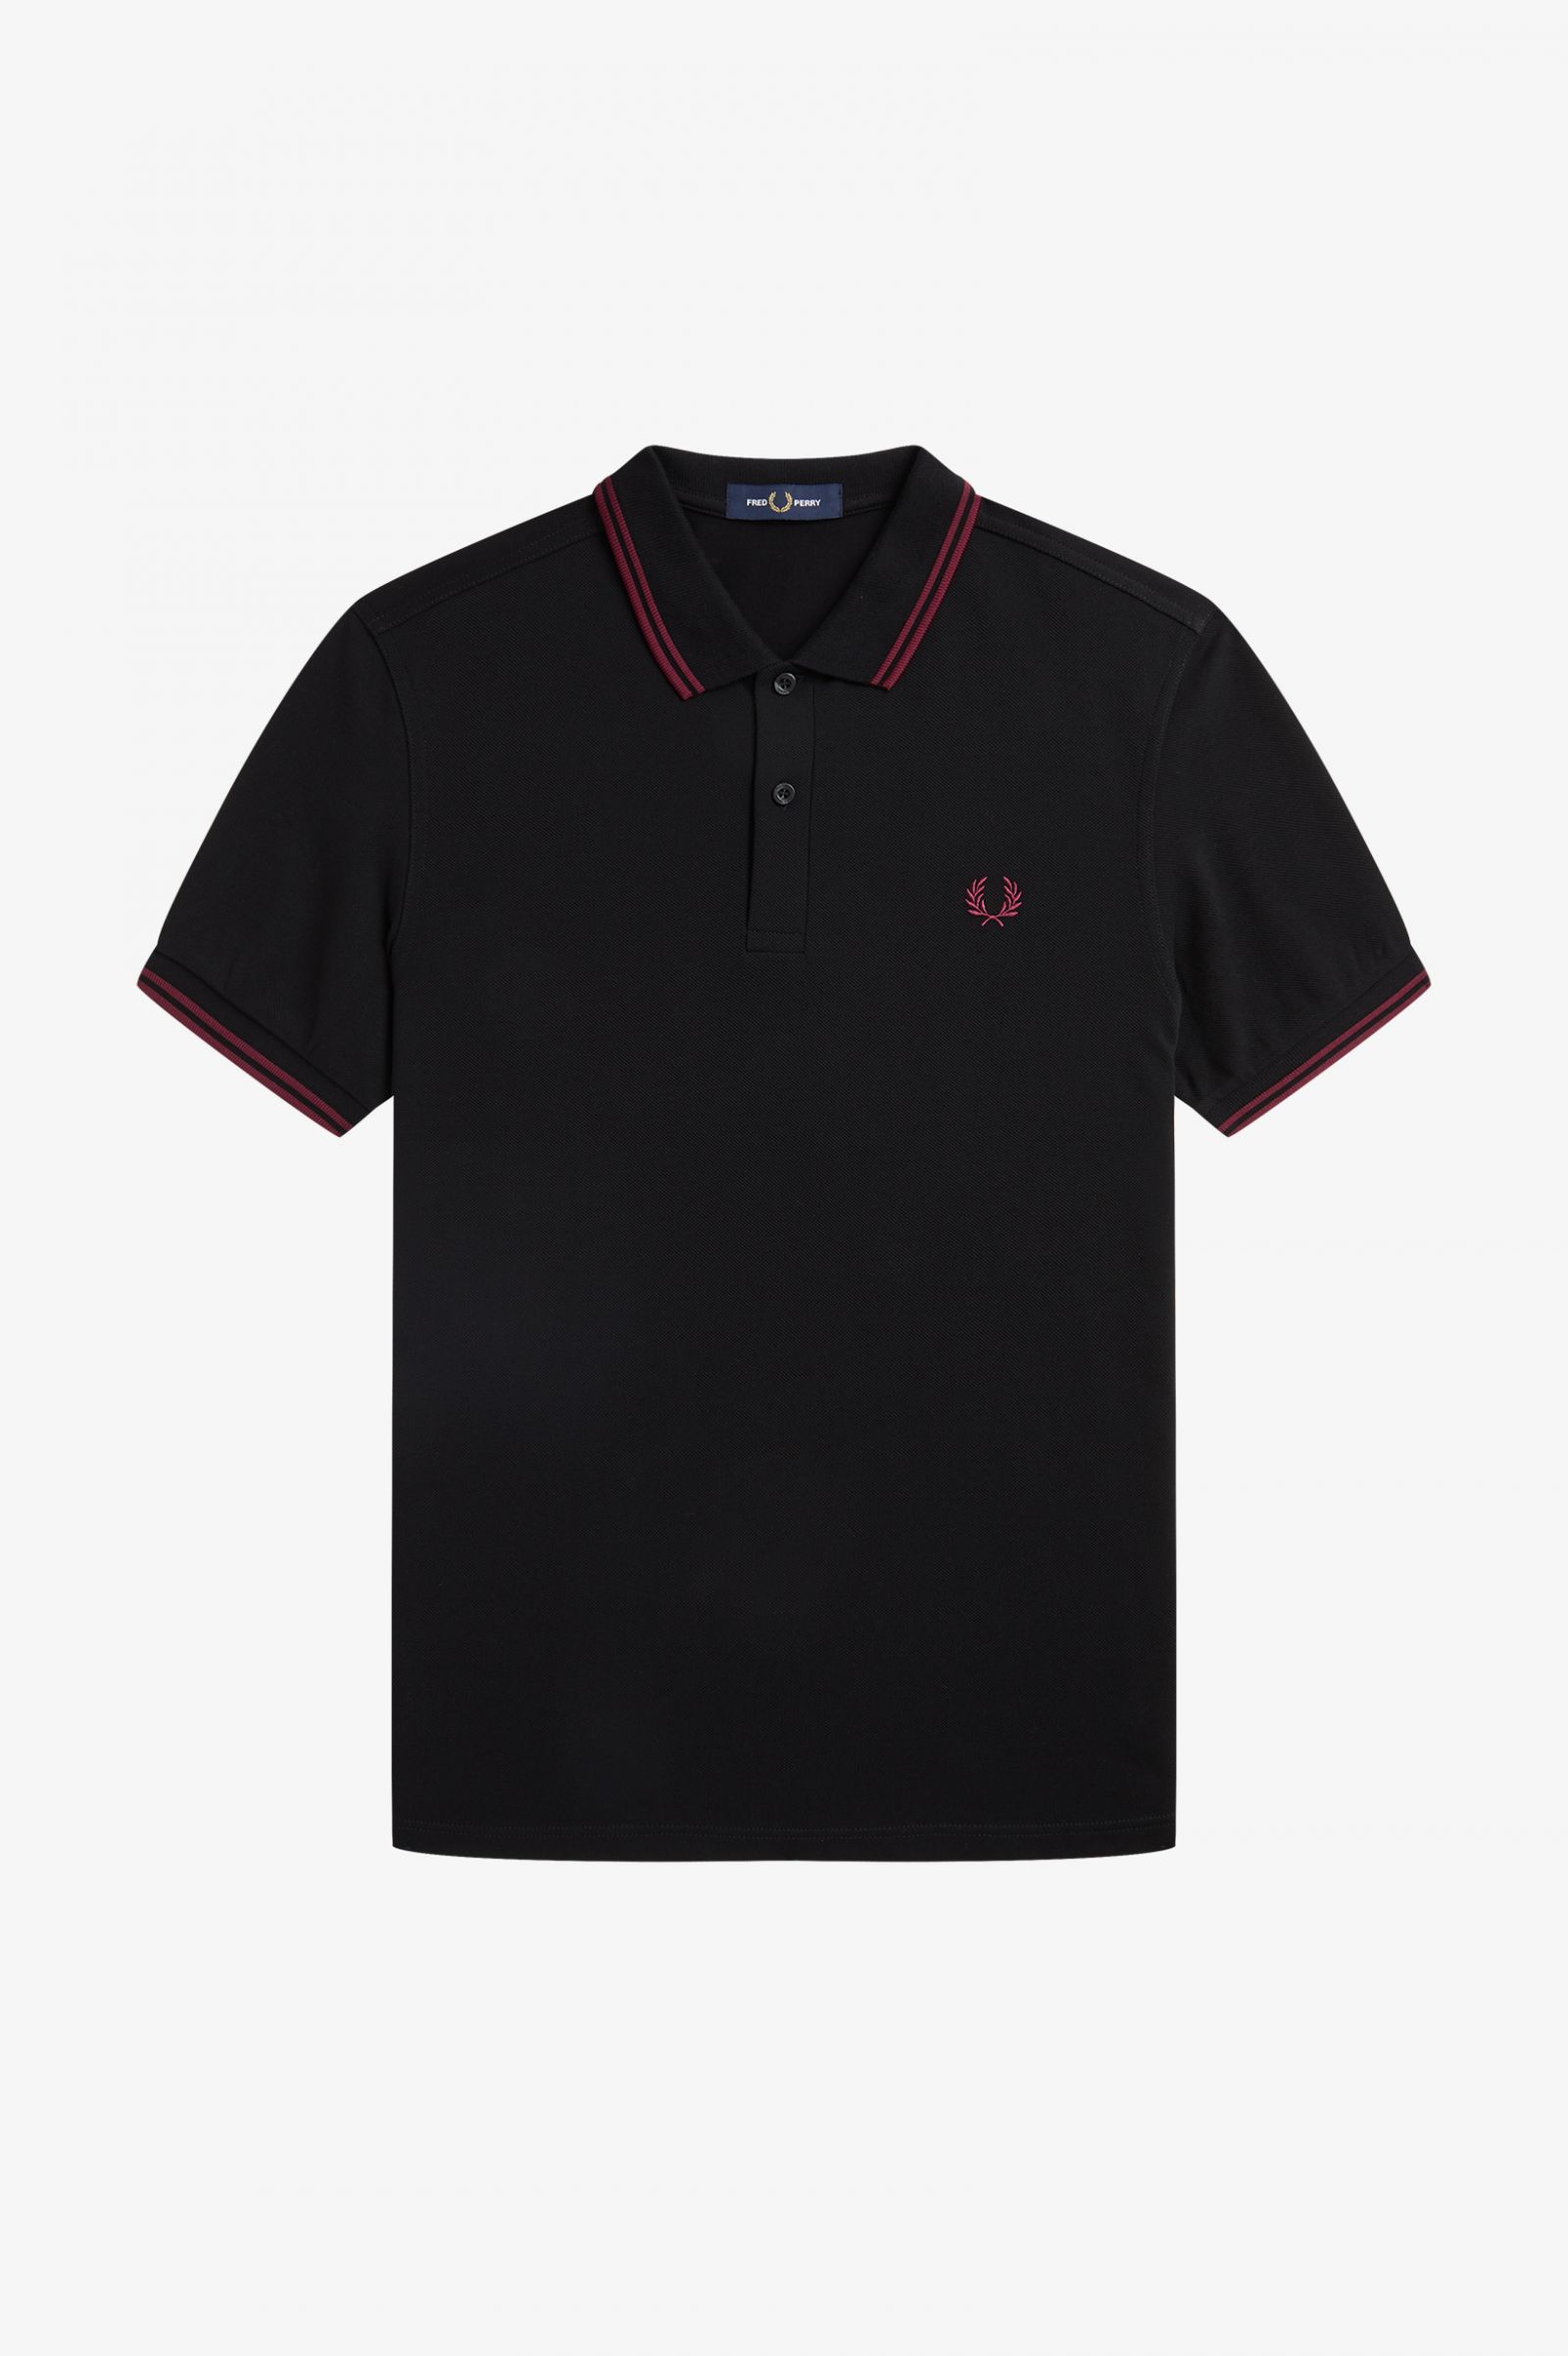 Fred Perry Twin Tipped Herren Polo Shirt in Schwarz/Tawny Port